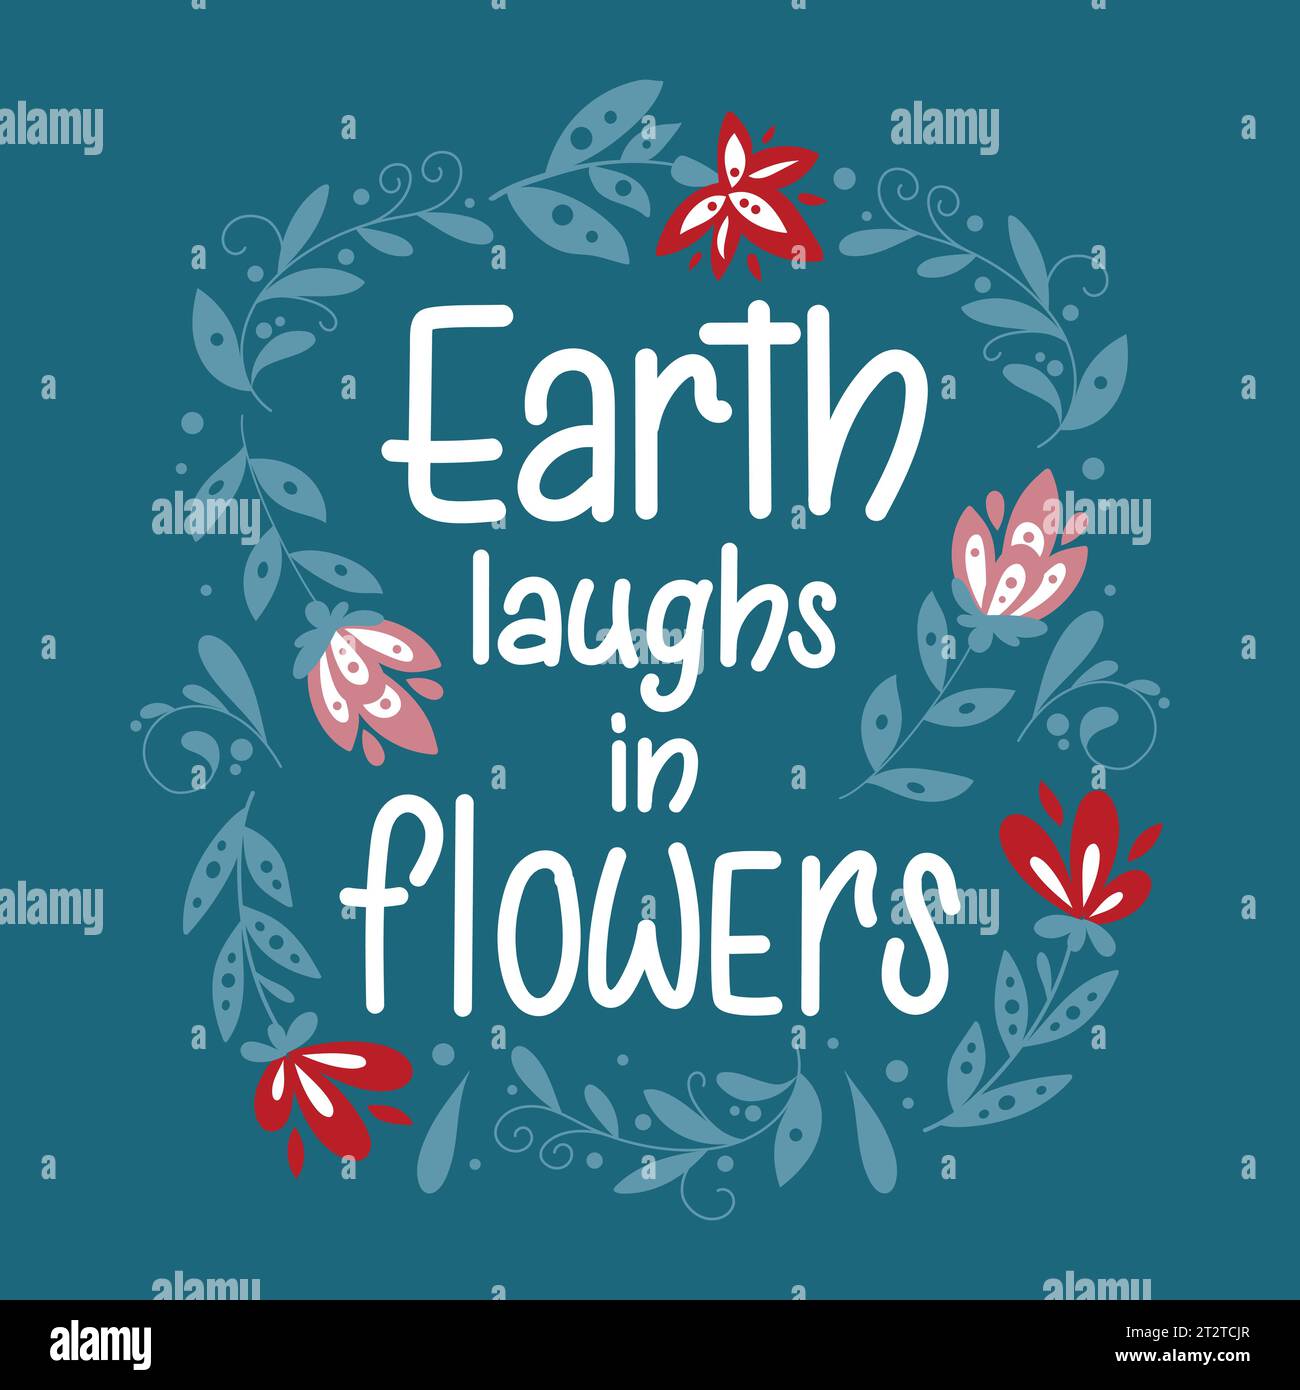 Earth flowers Stock Vector Images - Alamy